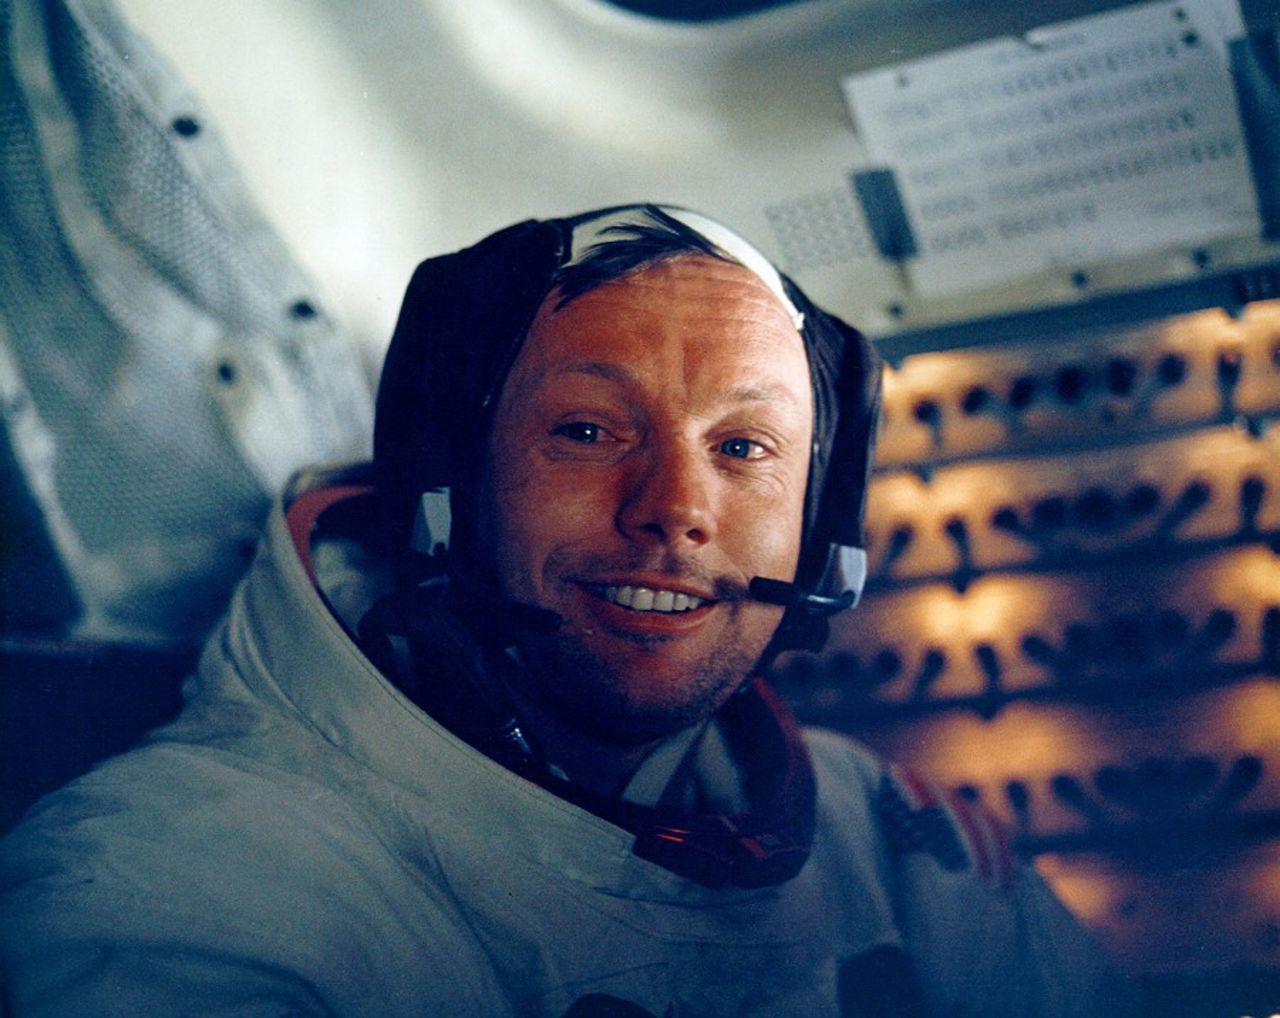 Neil Armstrong, pictured inside the lunar module, made the "giant leap for mankind."